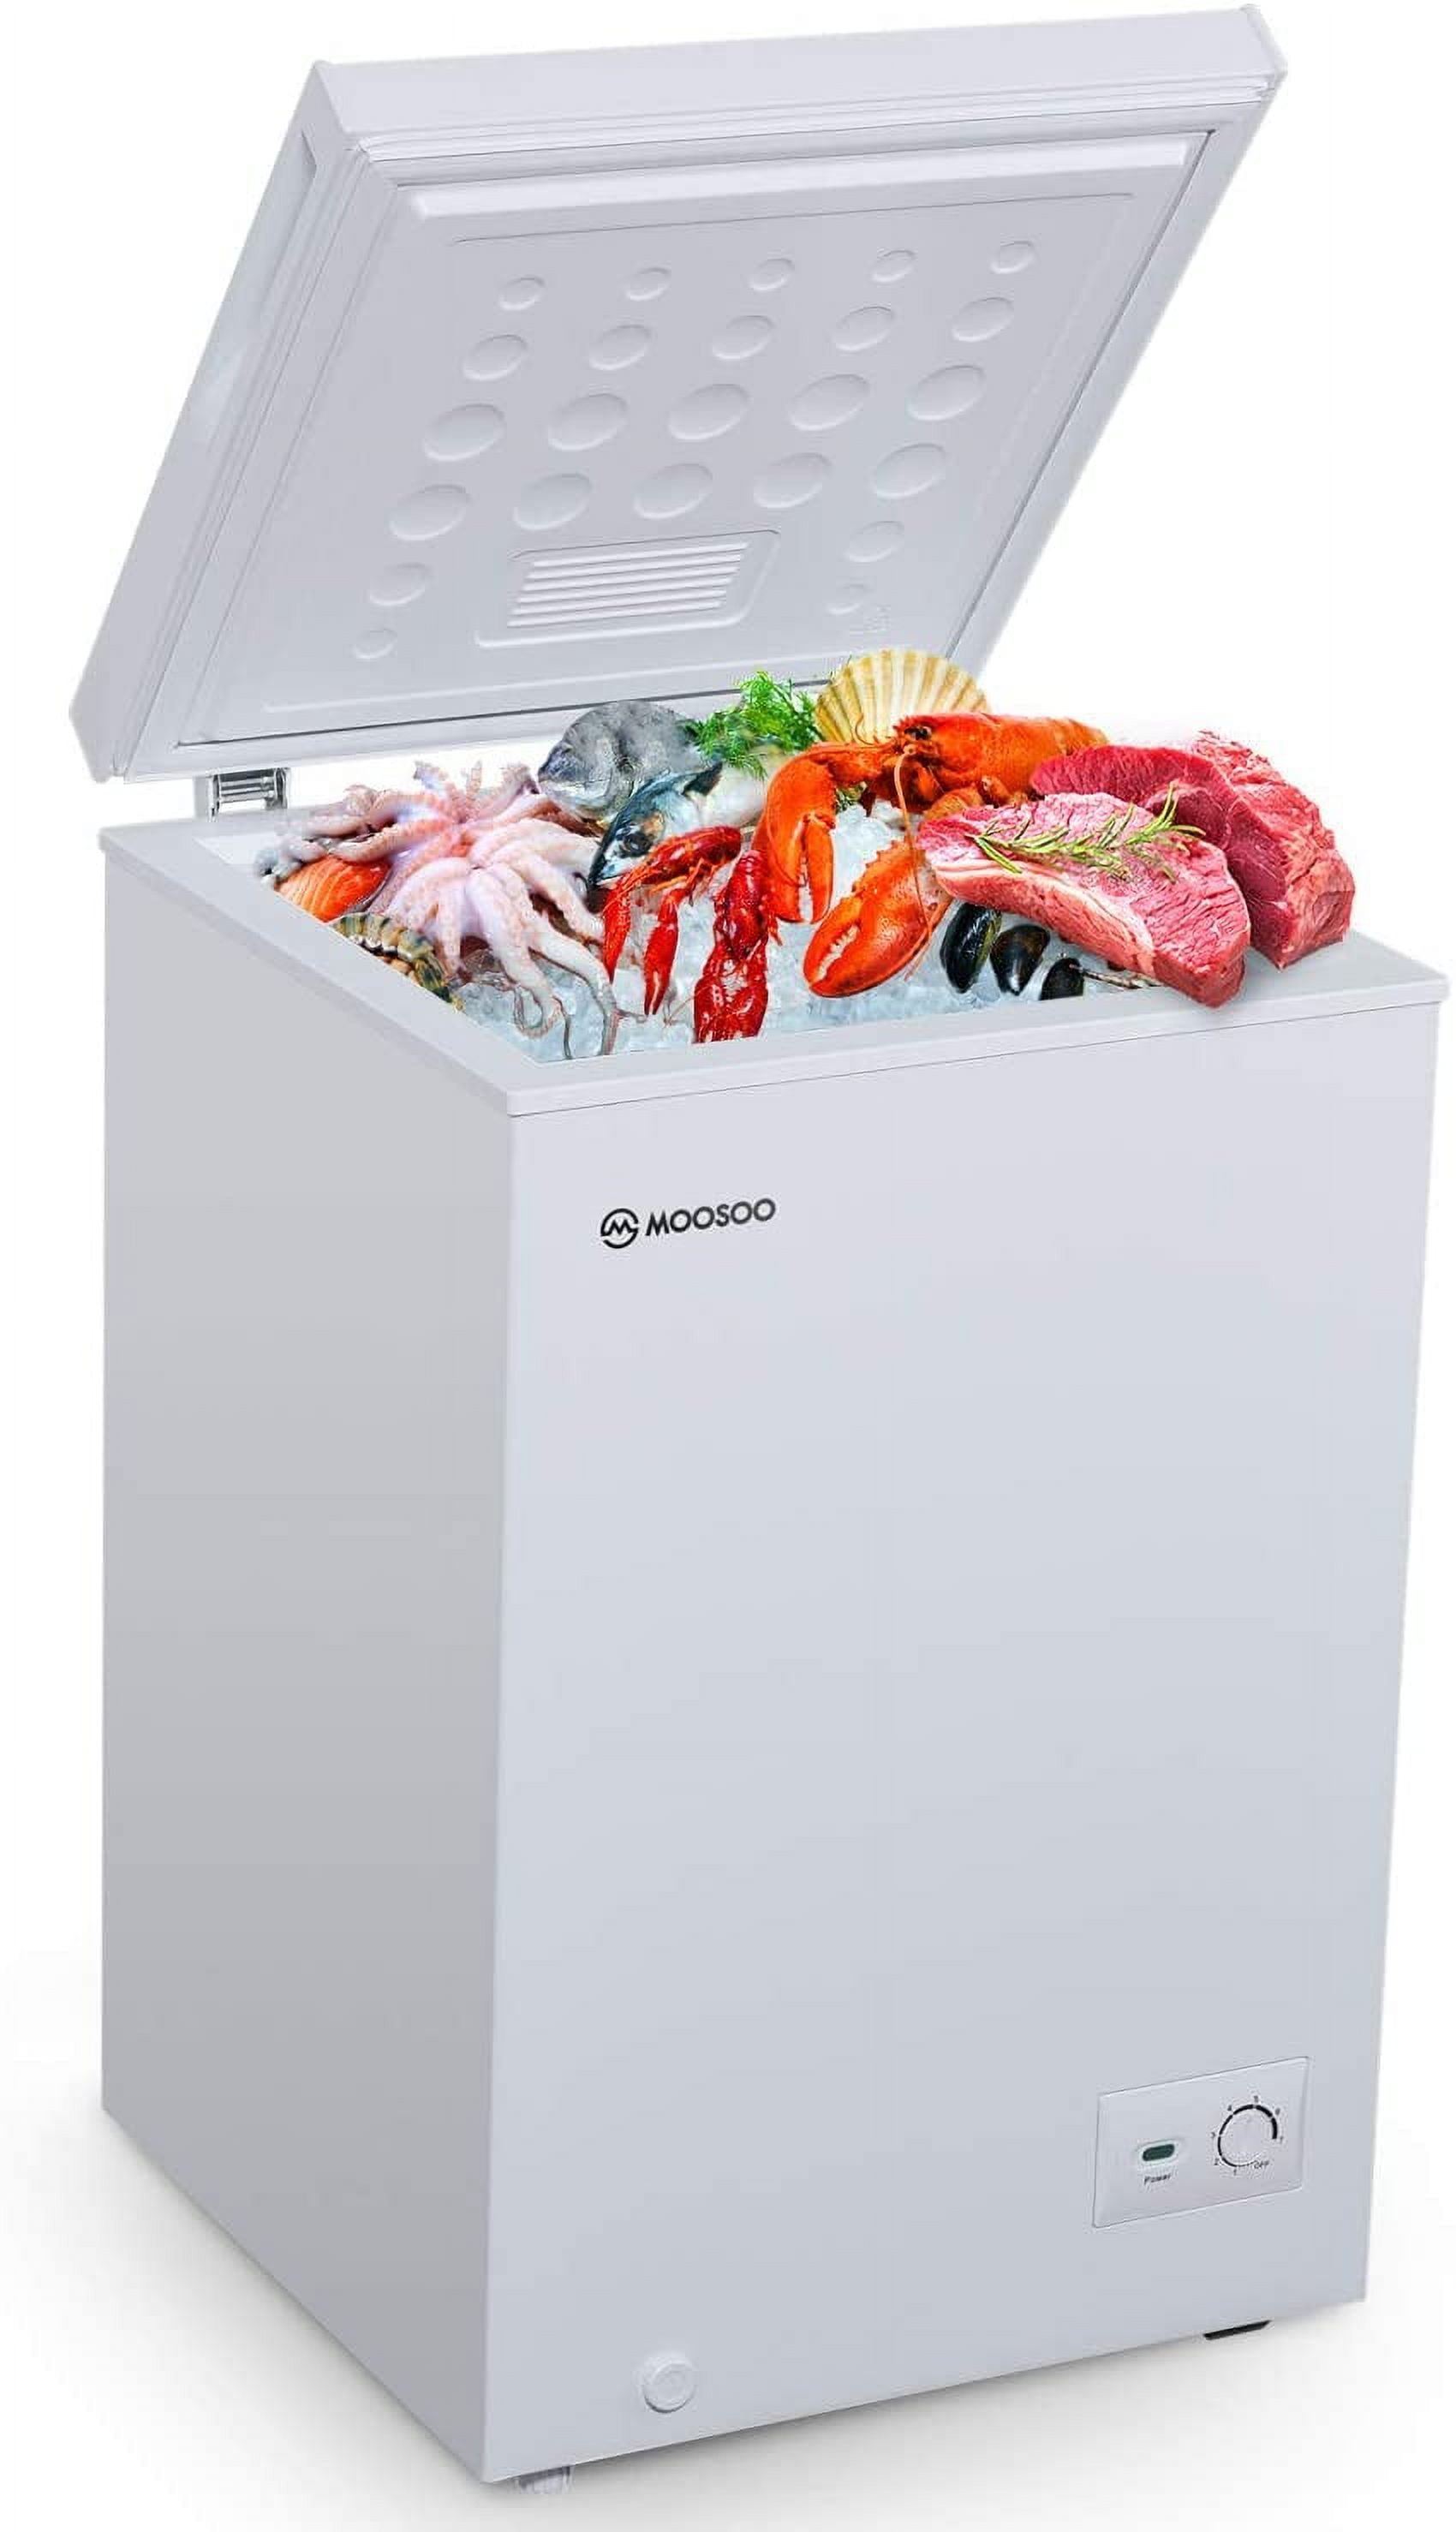 MOOSOO M 3.5 Cubic Feet Chest Freezer (DF1MD35AUS-B) is an  Energy-saving/CSA Certified, top loading compact